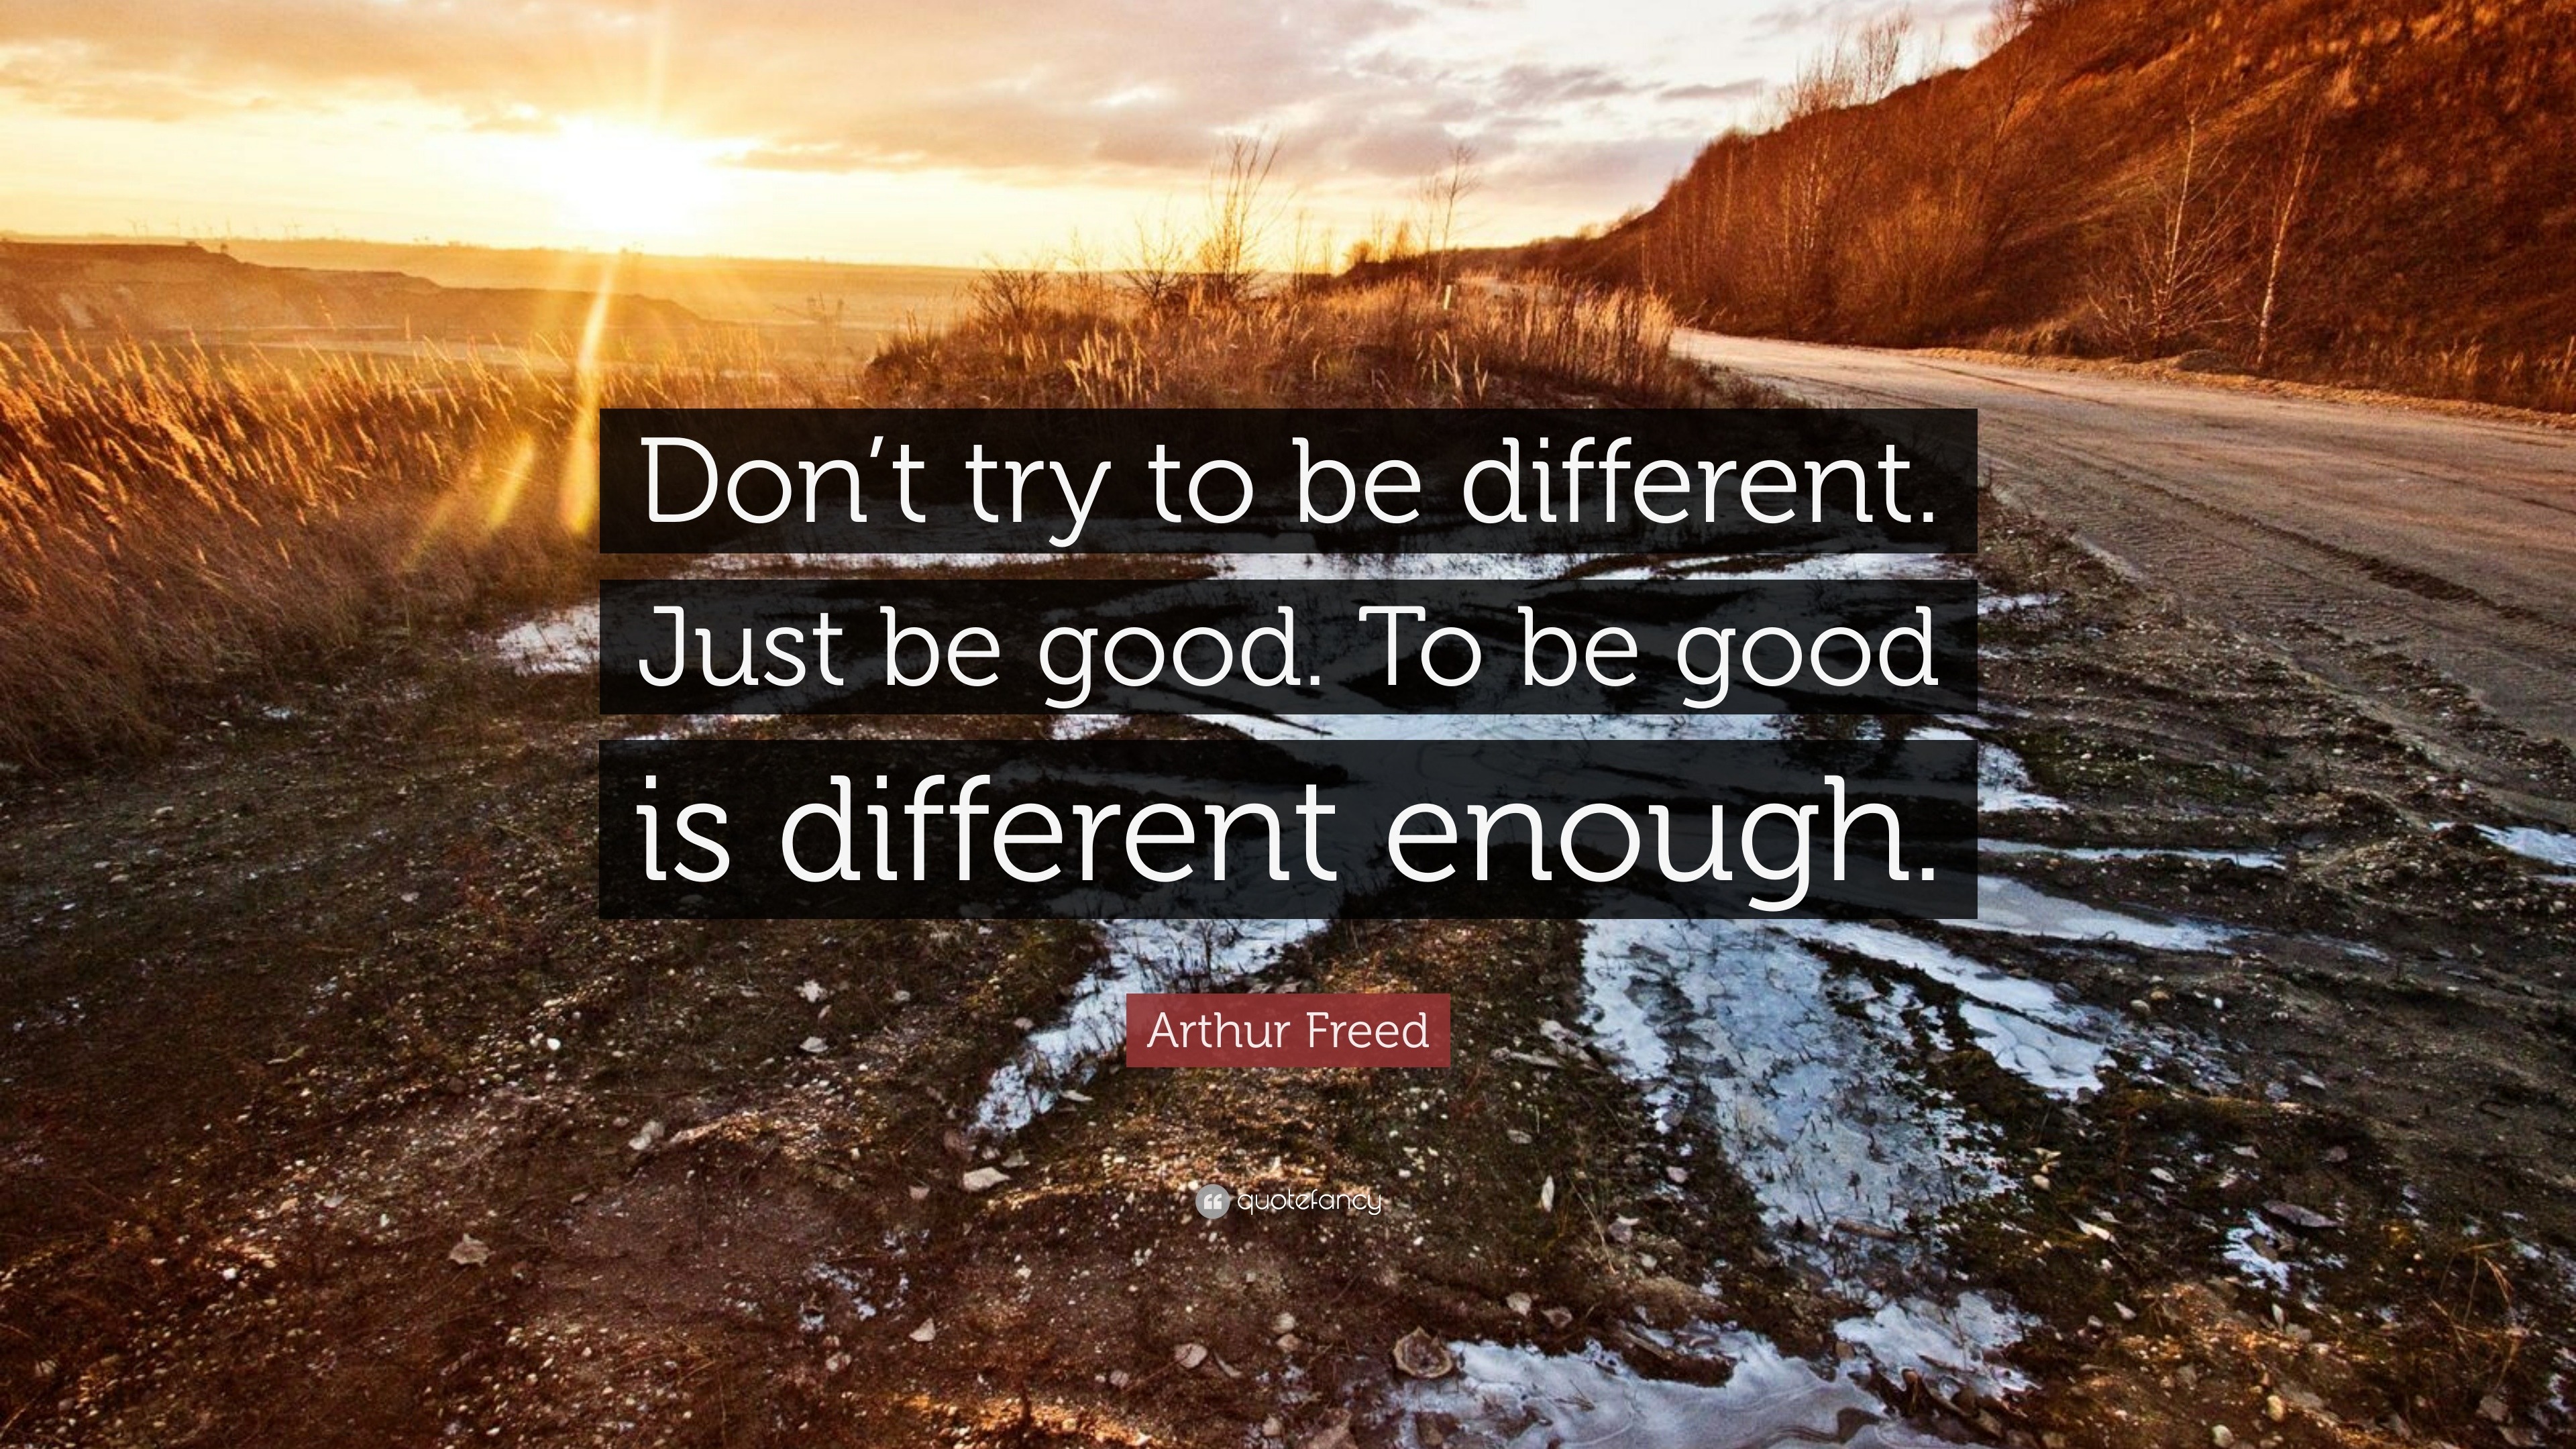 Arthur Freed Quote: “Don’t try to be different. Just be good. To be ...